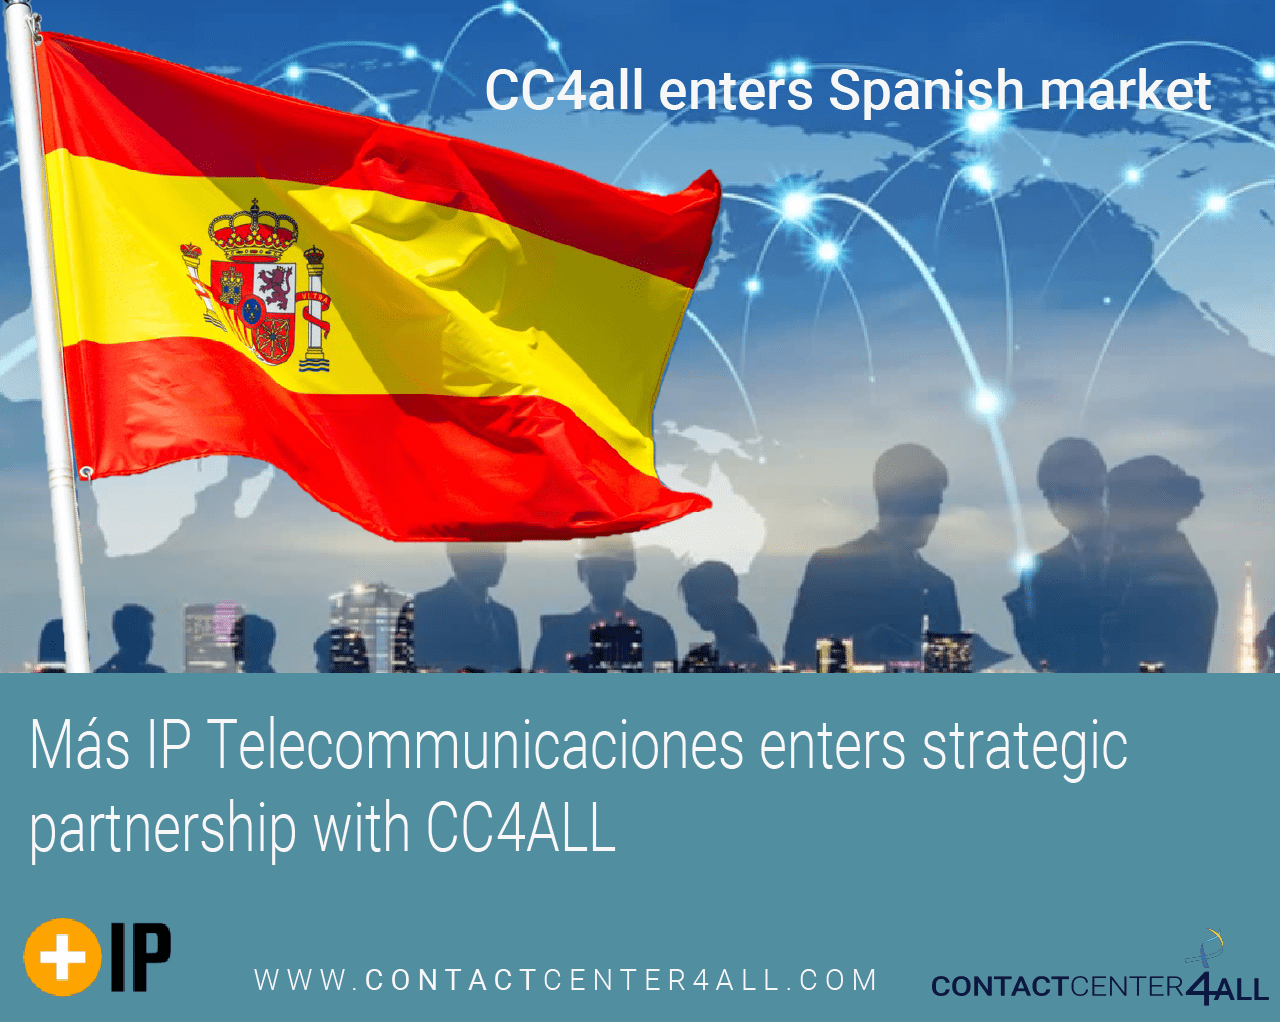 CC4all enters Spanish markets by partnering with Mas IP